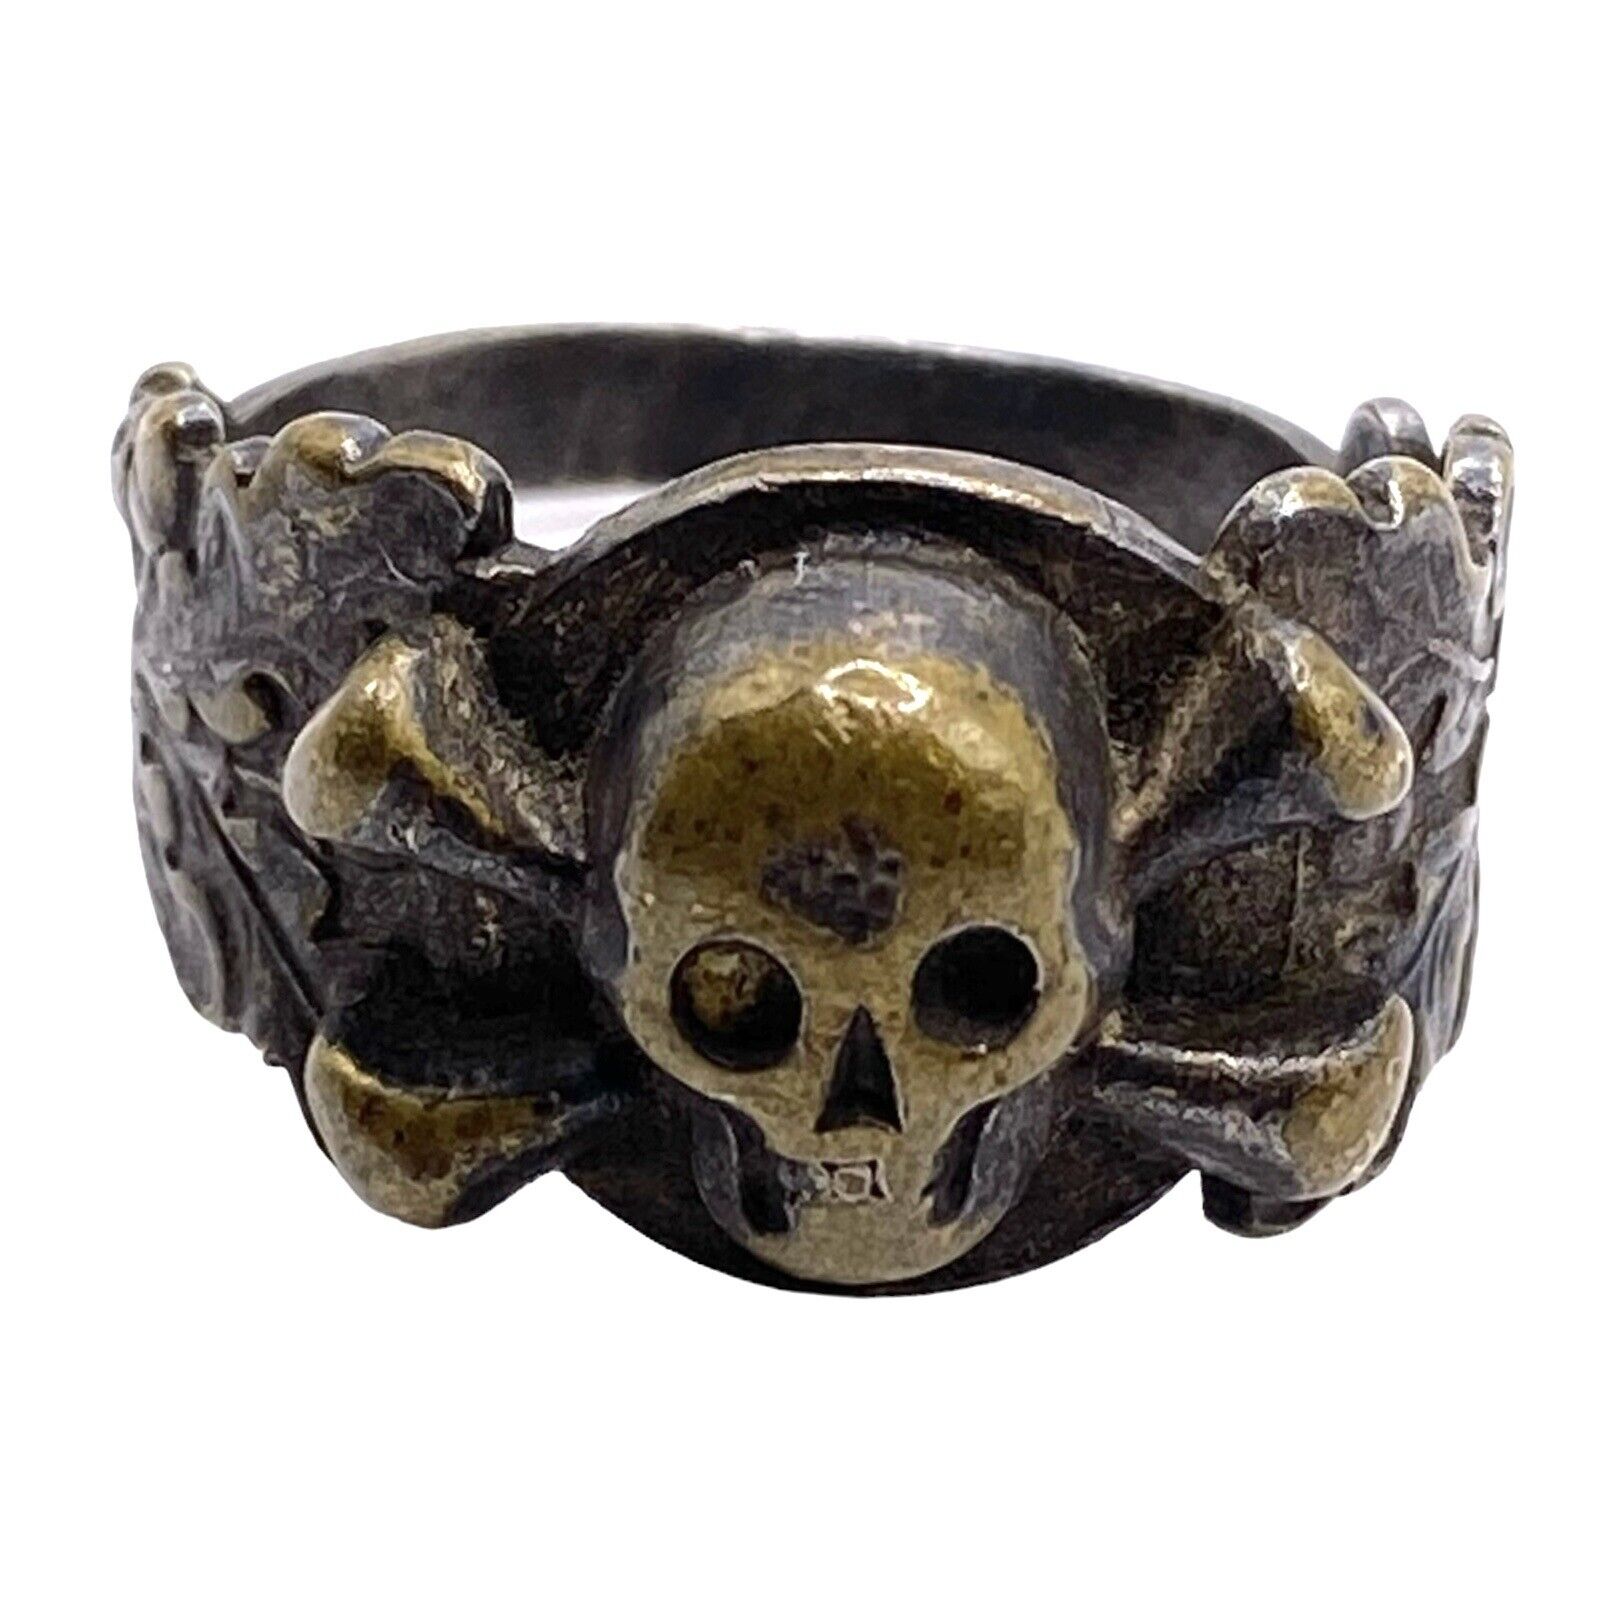 WW2 Military Relic Ring German Soldier WWII Skull Crossbones 800 Silver 1940s